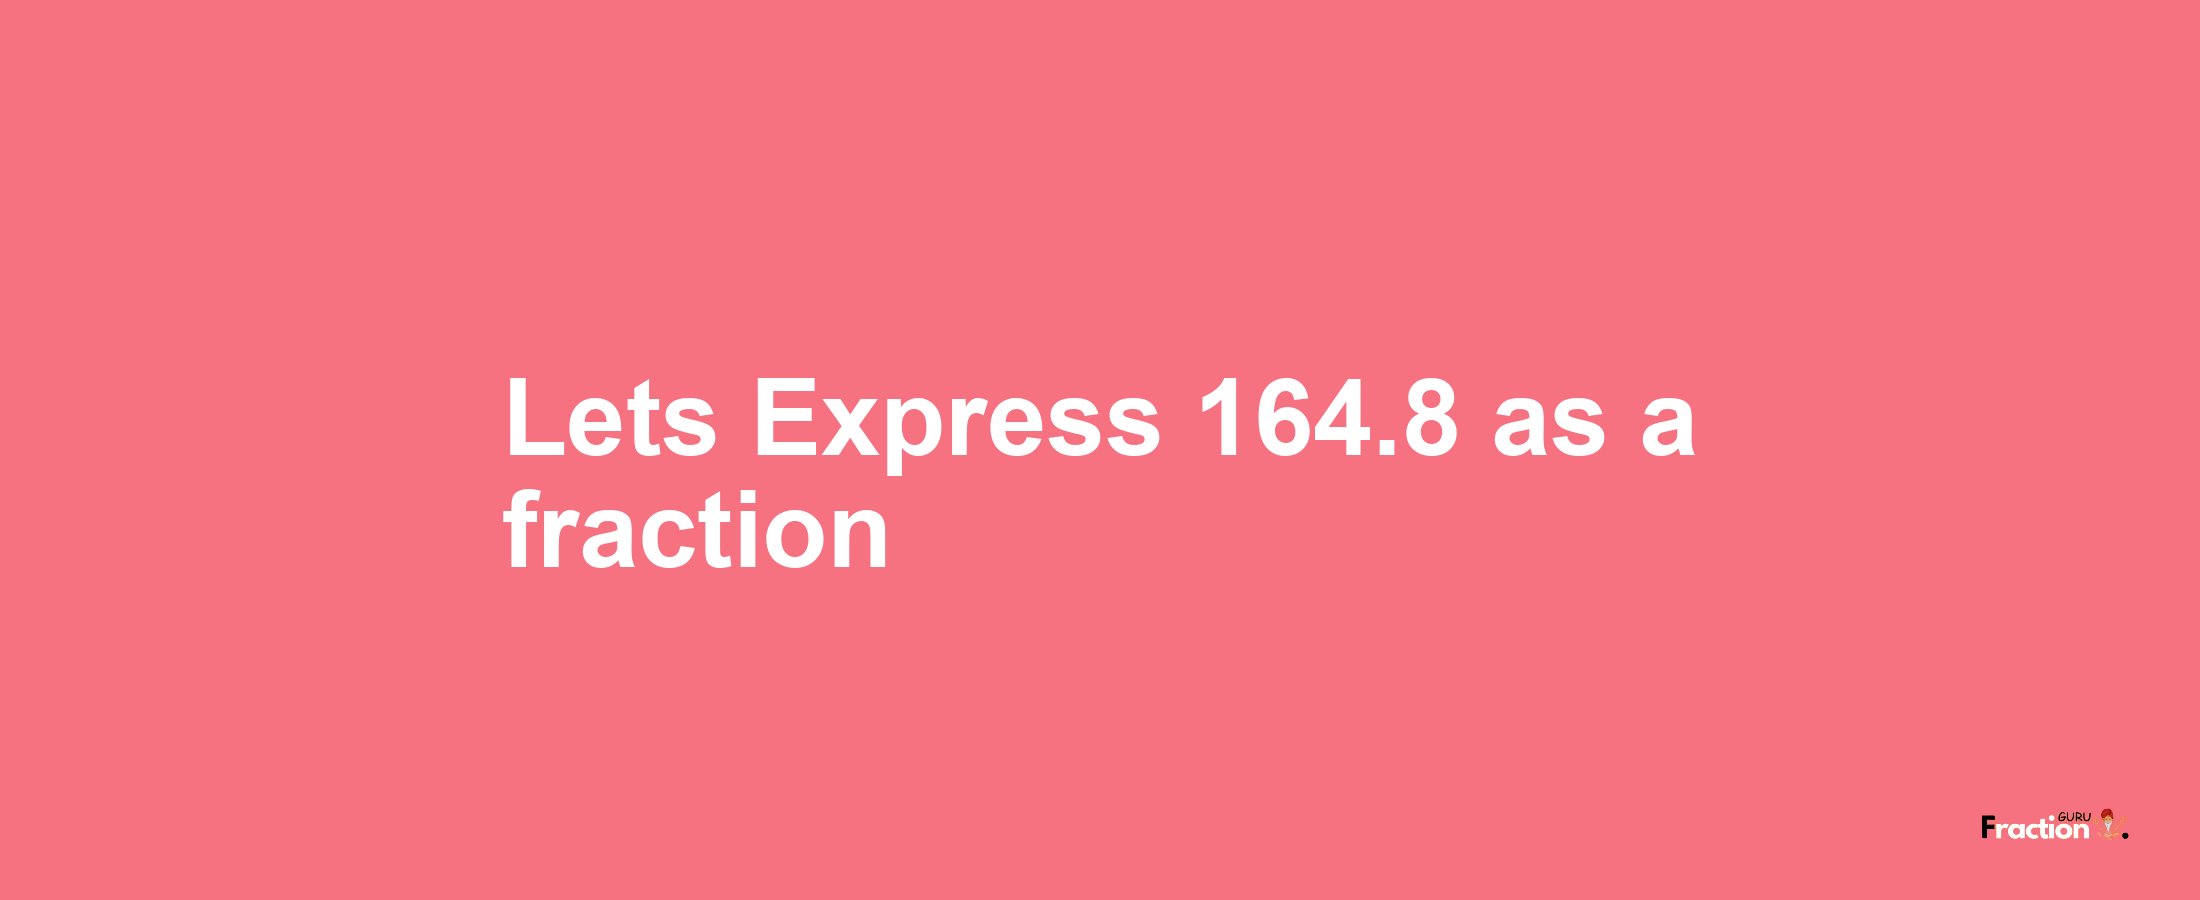 Lets Express 164.8 as afraction